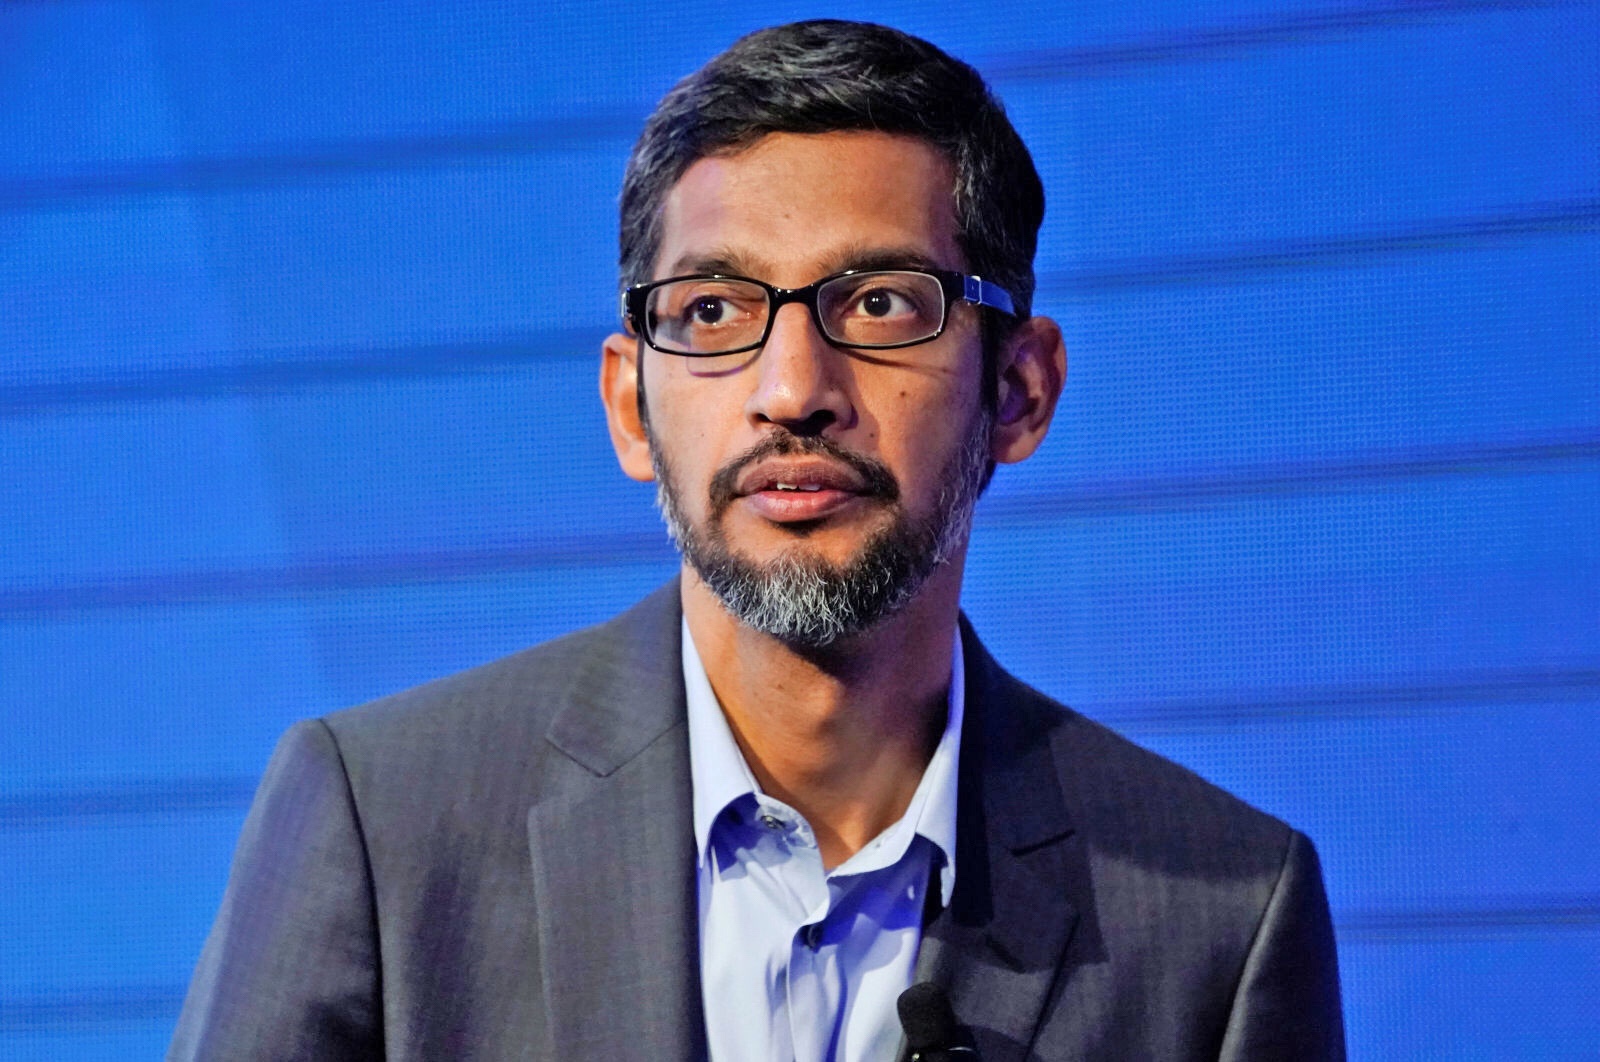 Google employees are petitioning for CEO to get out of Pentagon AI project